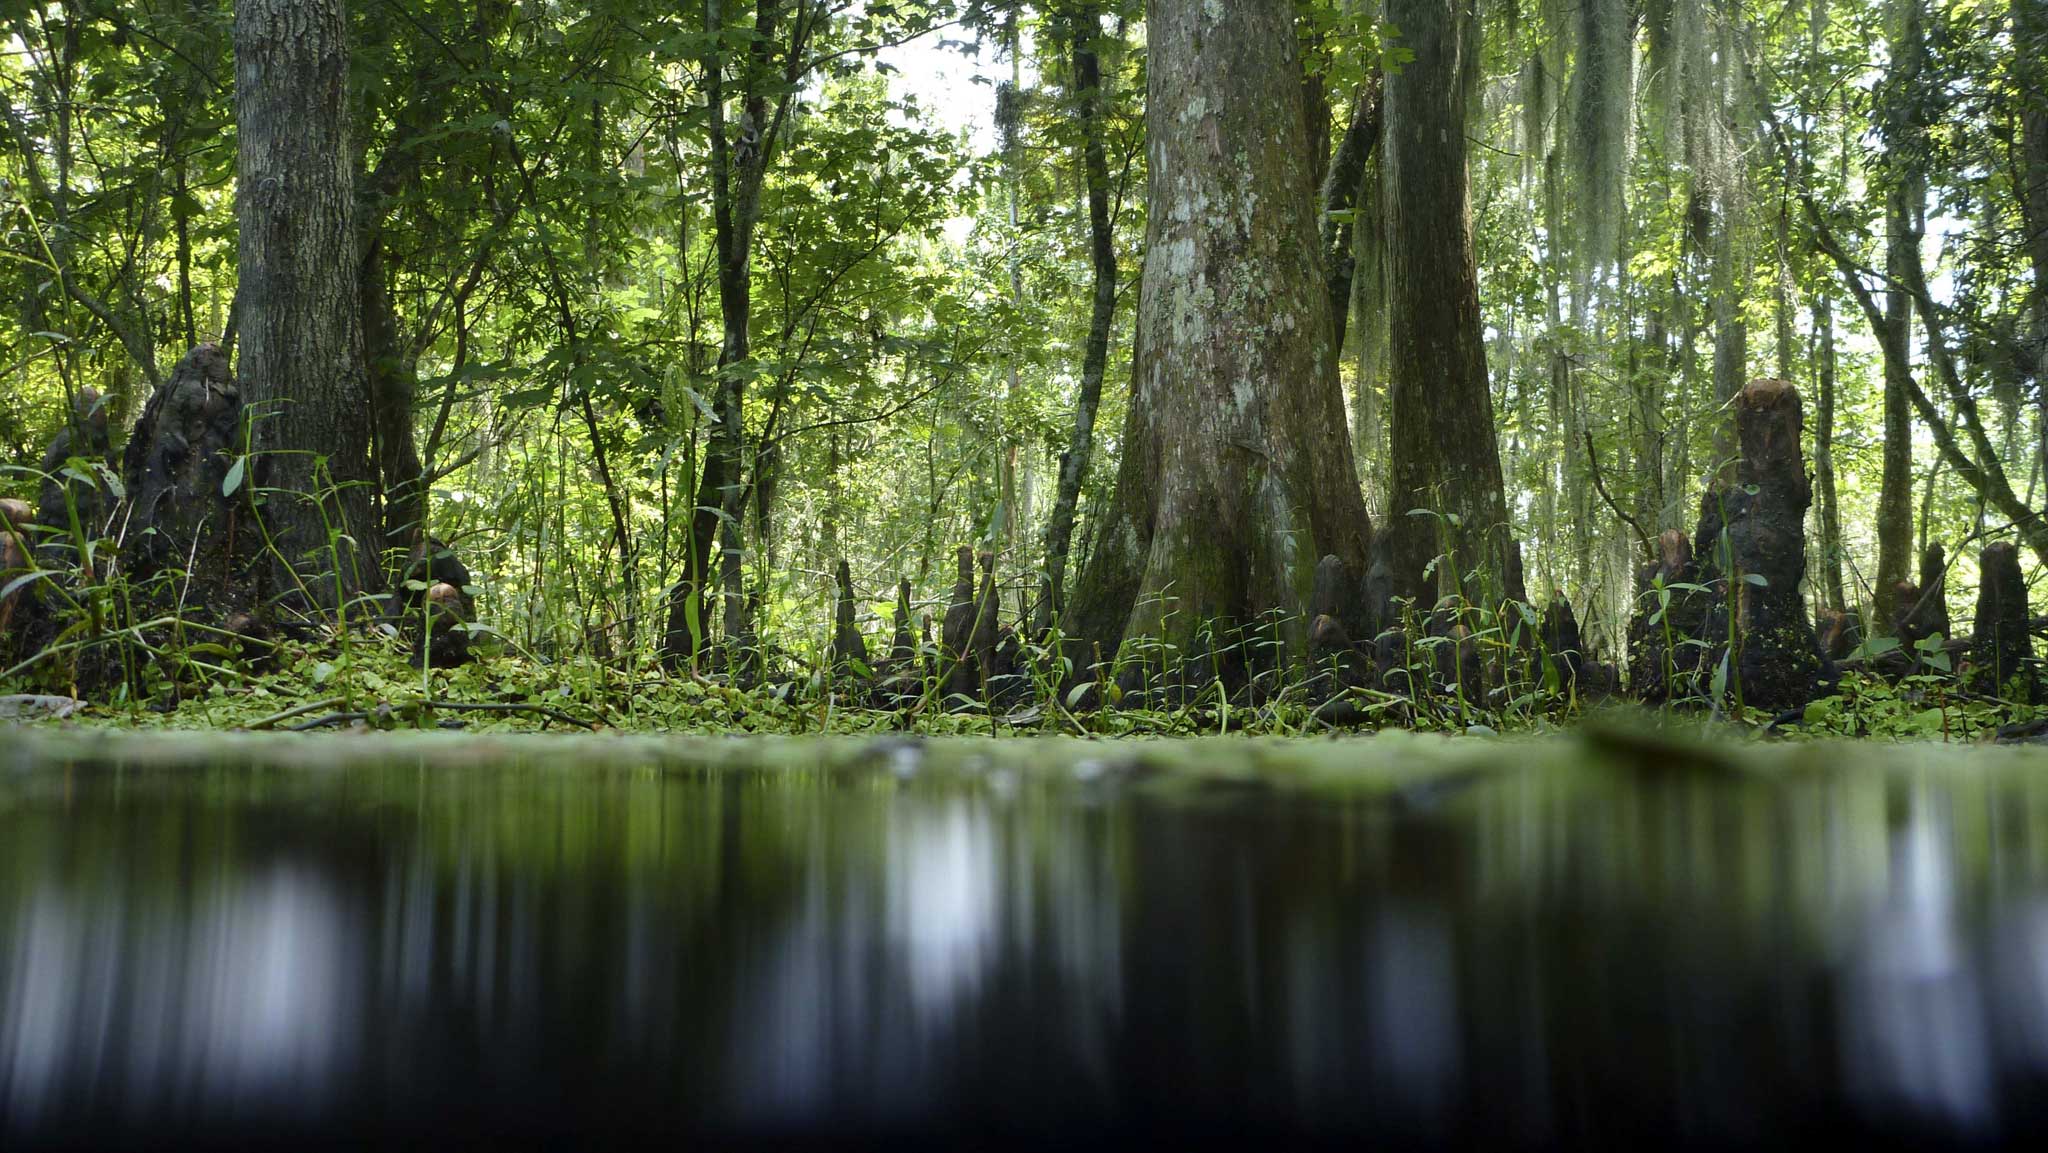 Sacred woods: a mangrove swamp on the Gulf of Mexico in Louisiana